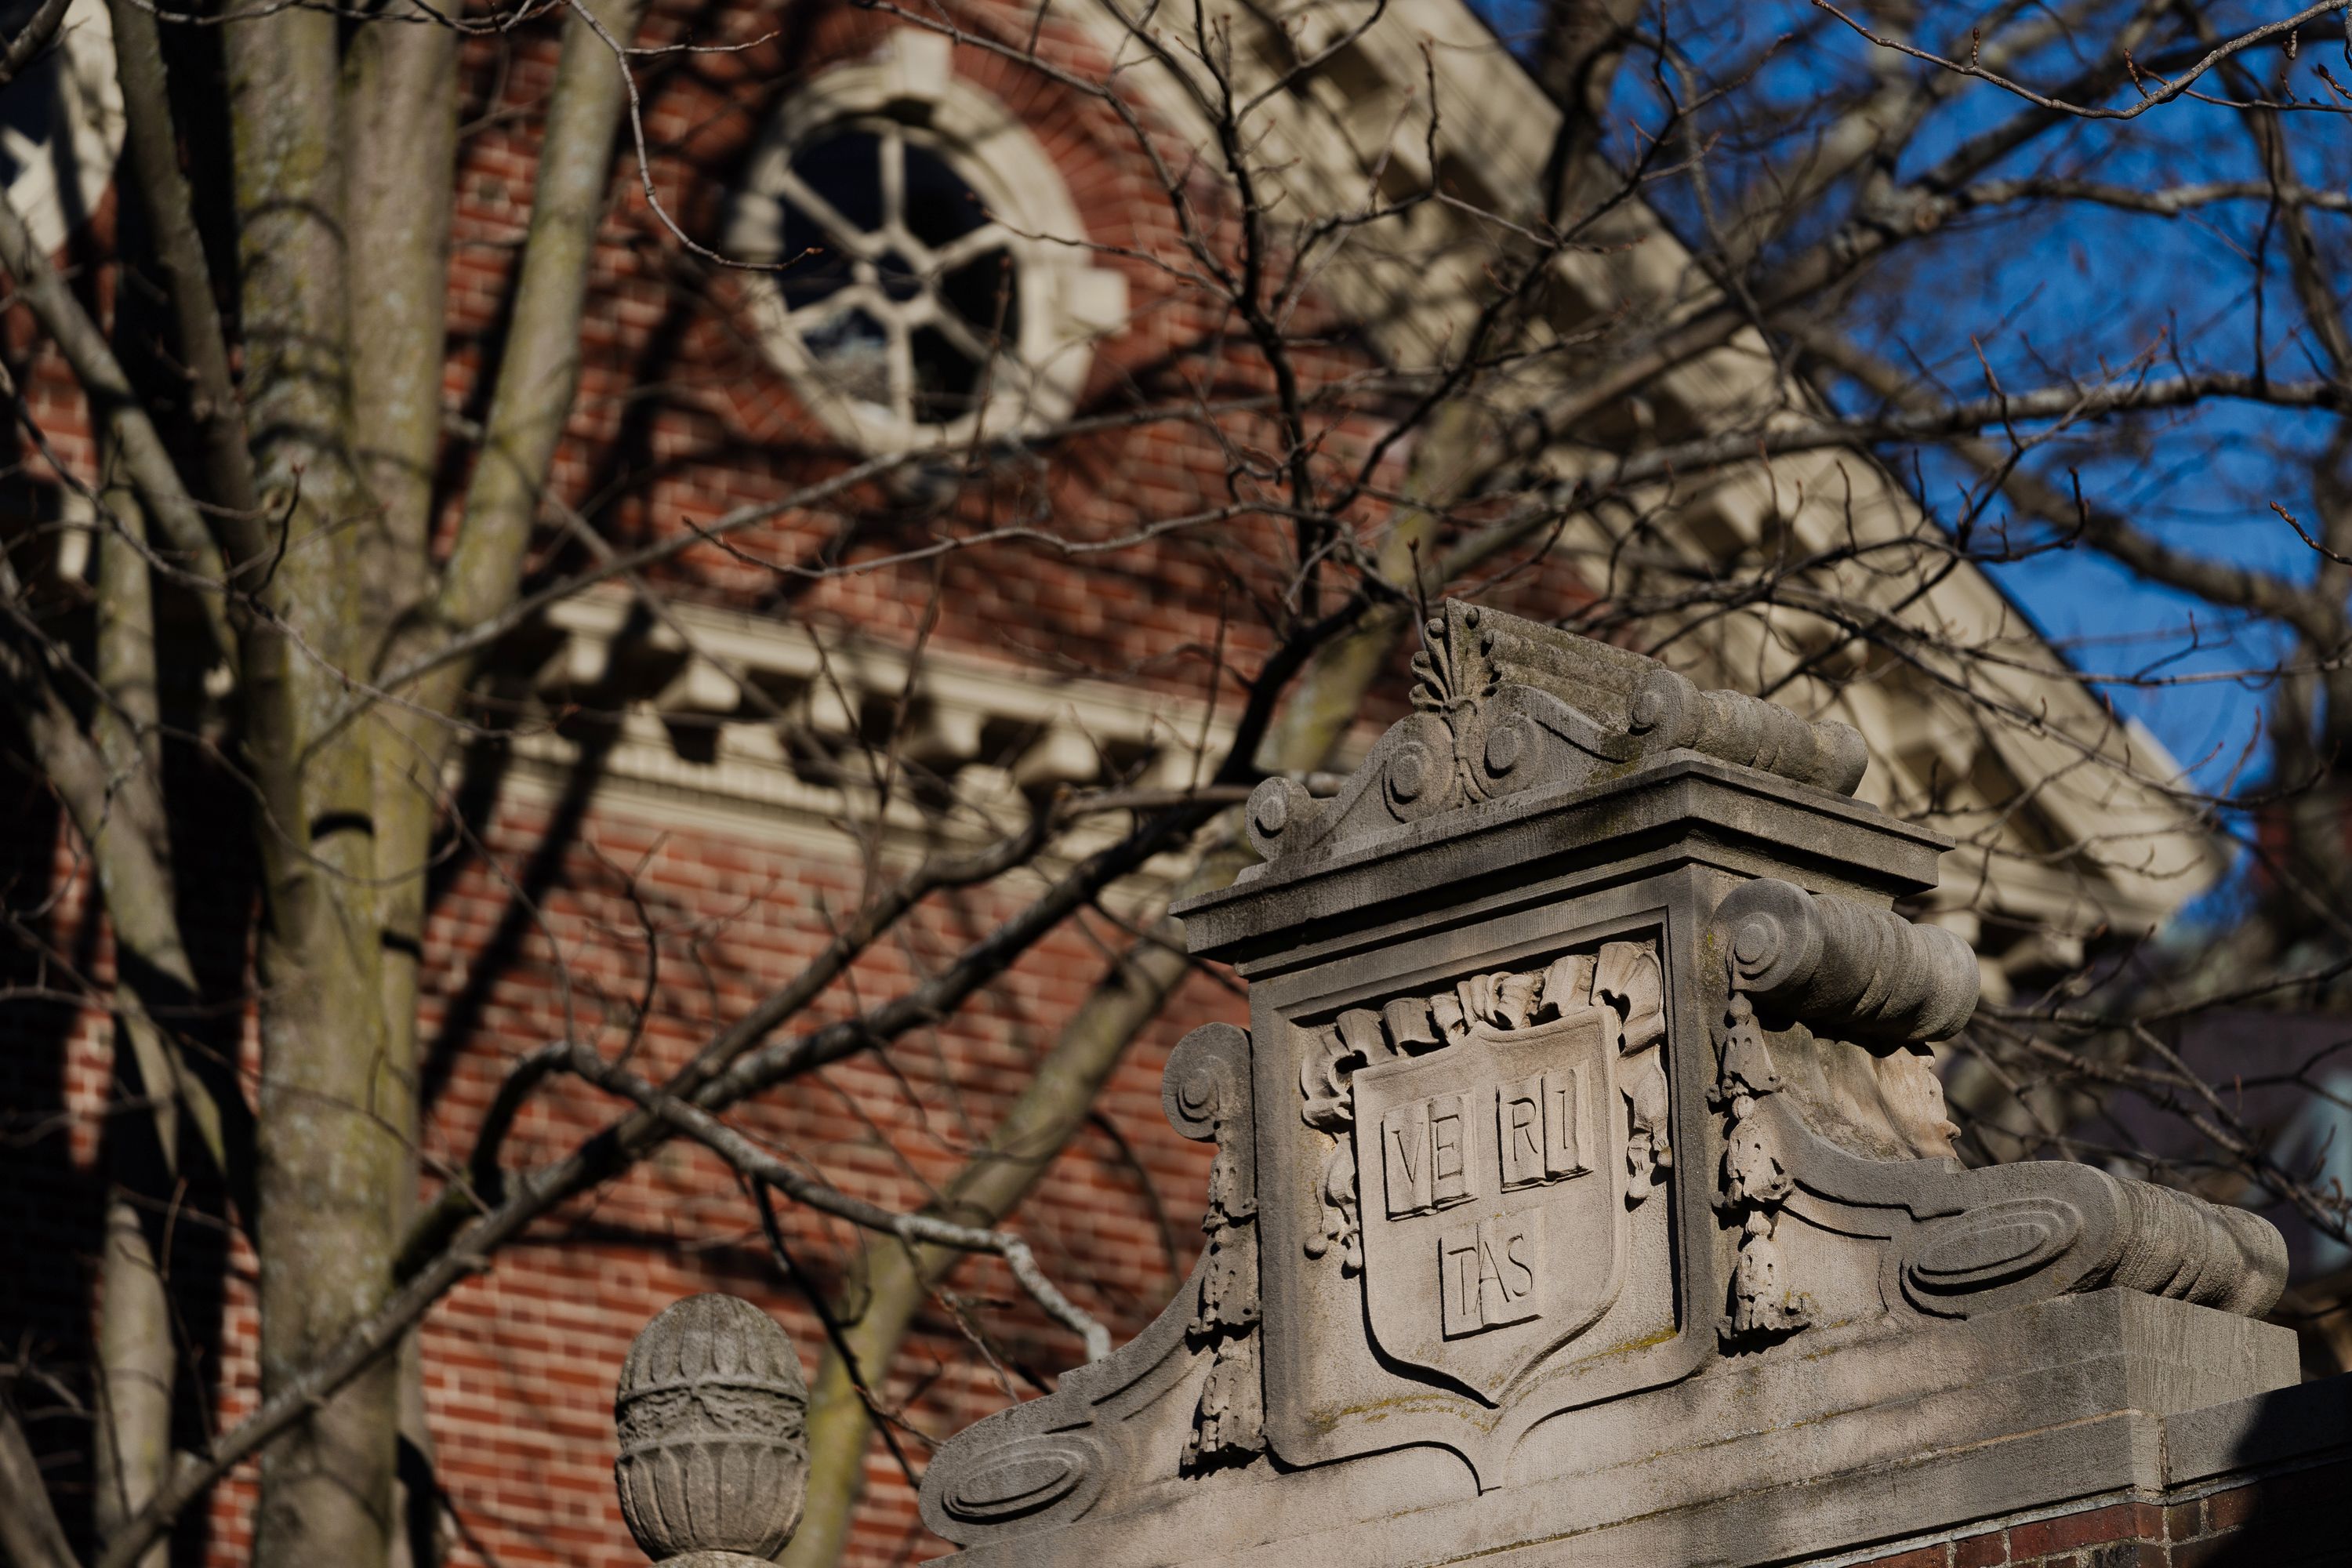 Harvard launches new efforts to bring calm